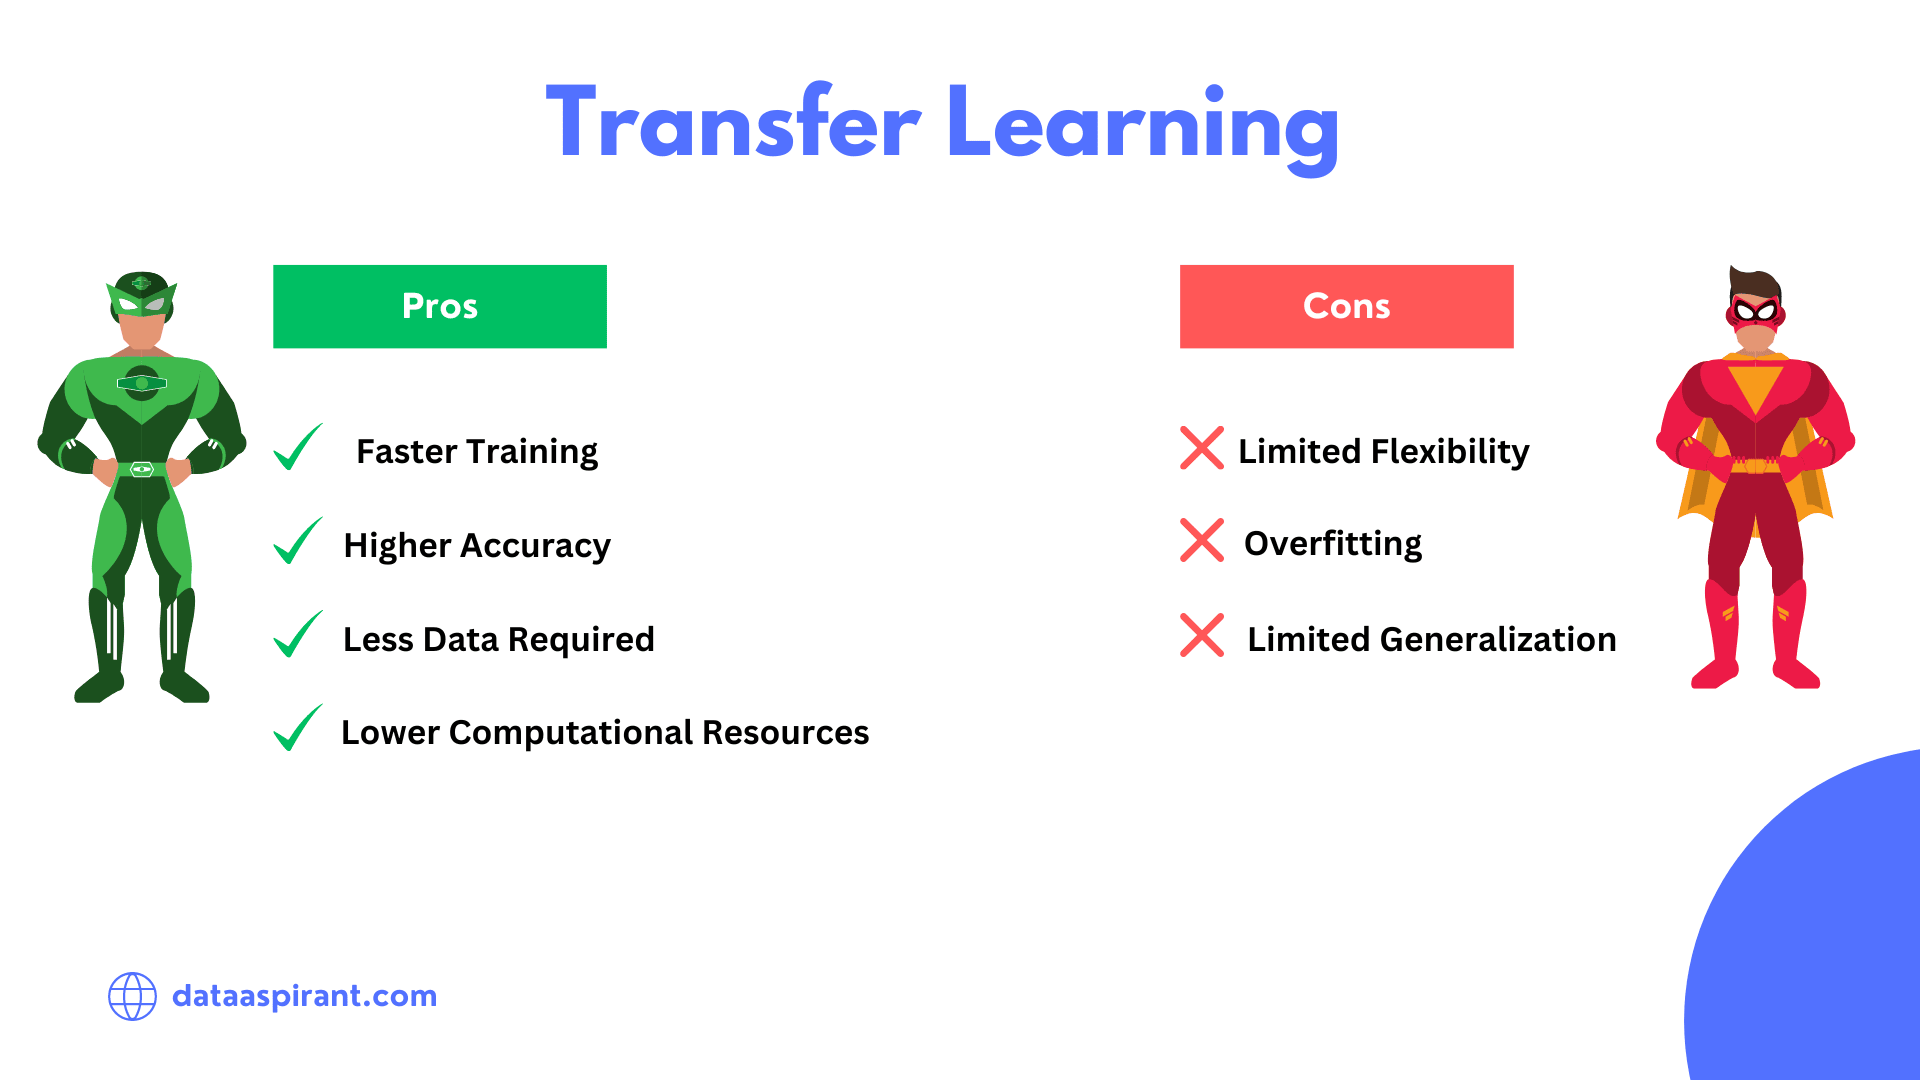 Pros and Cons of Transfer Learning